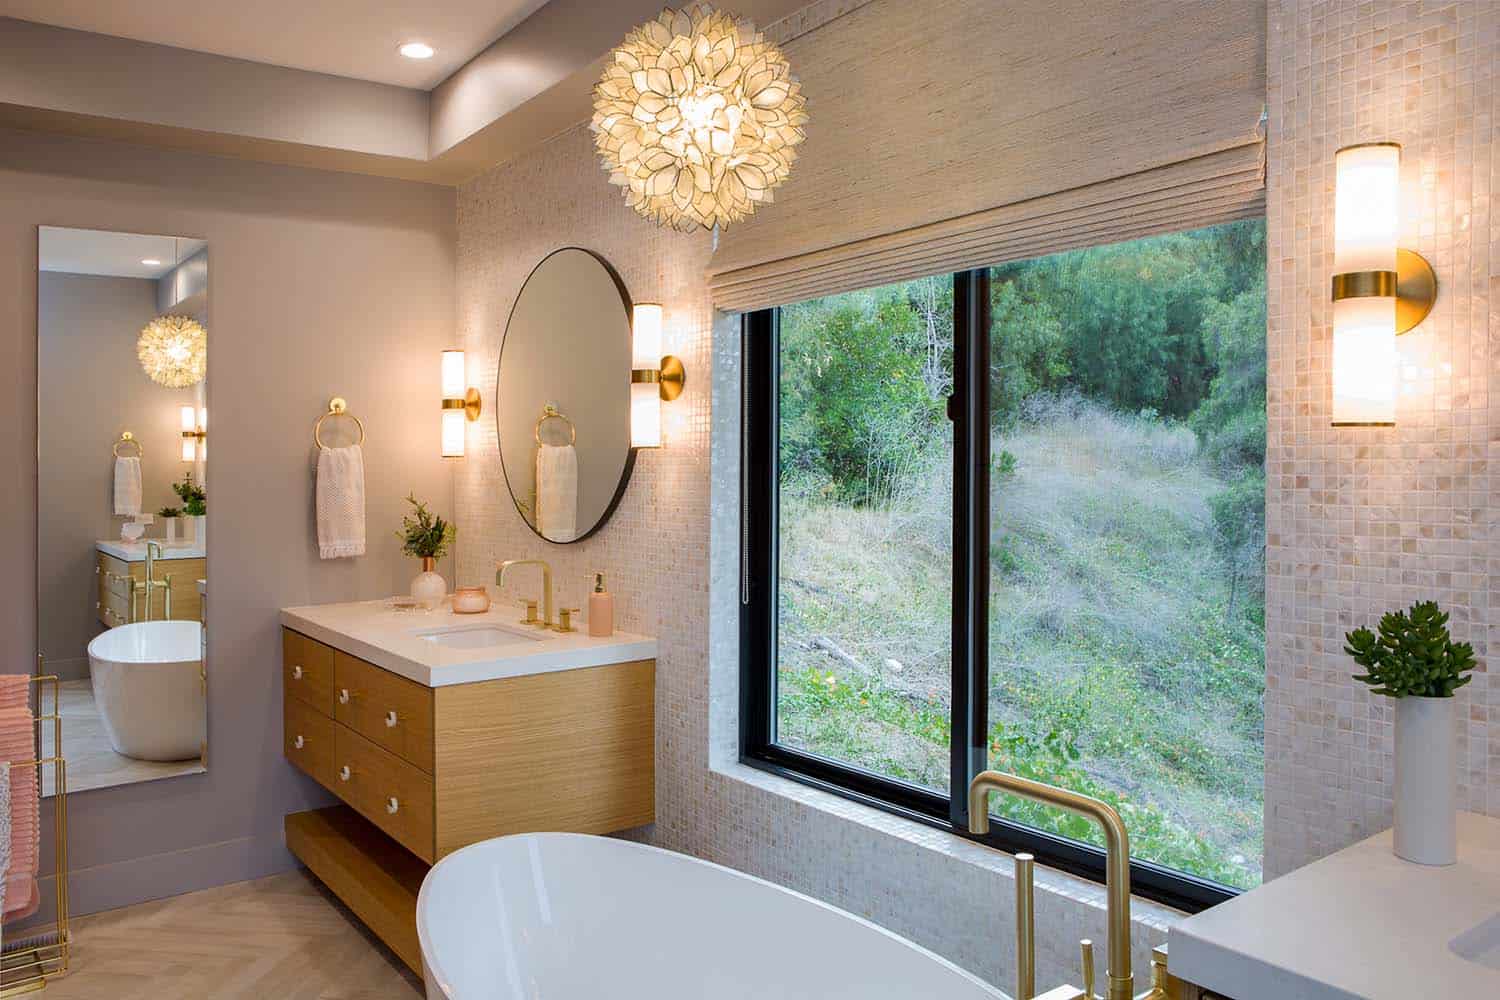 freestanding tub with a window view of the canyon trees